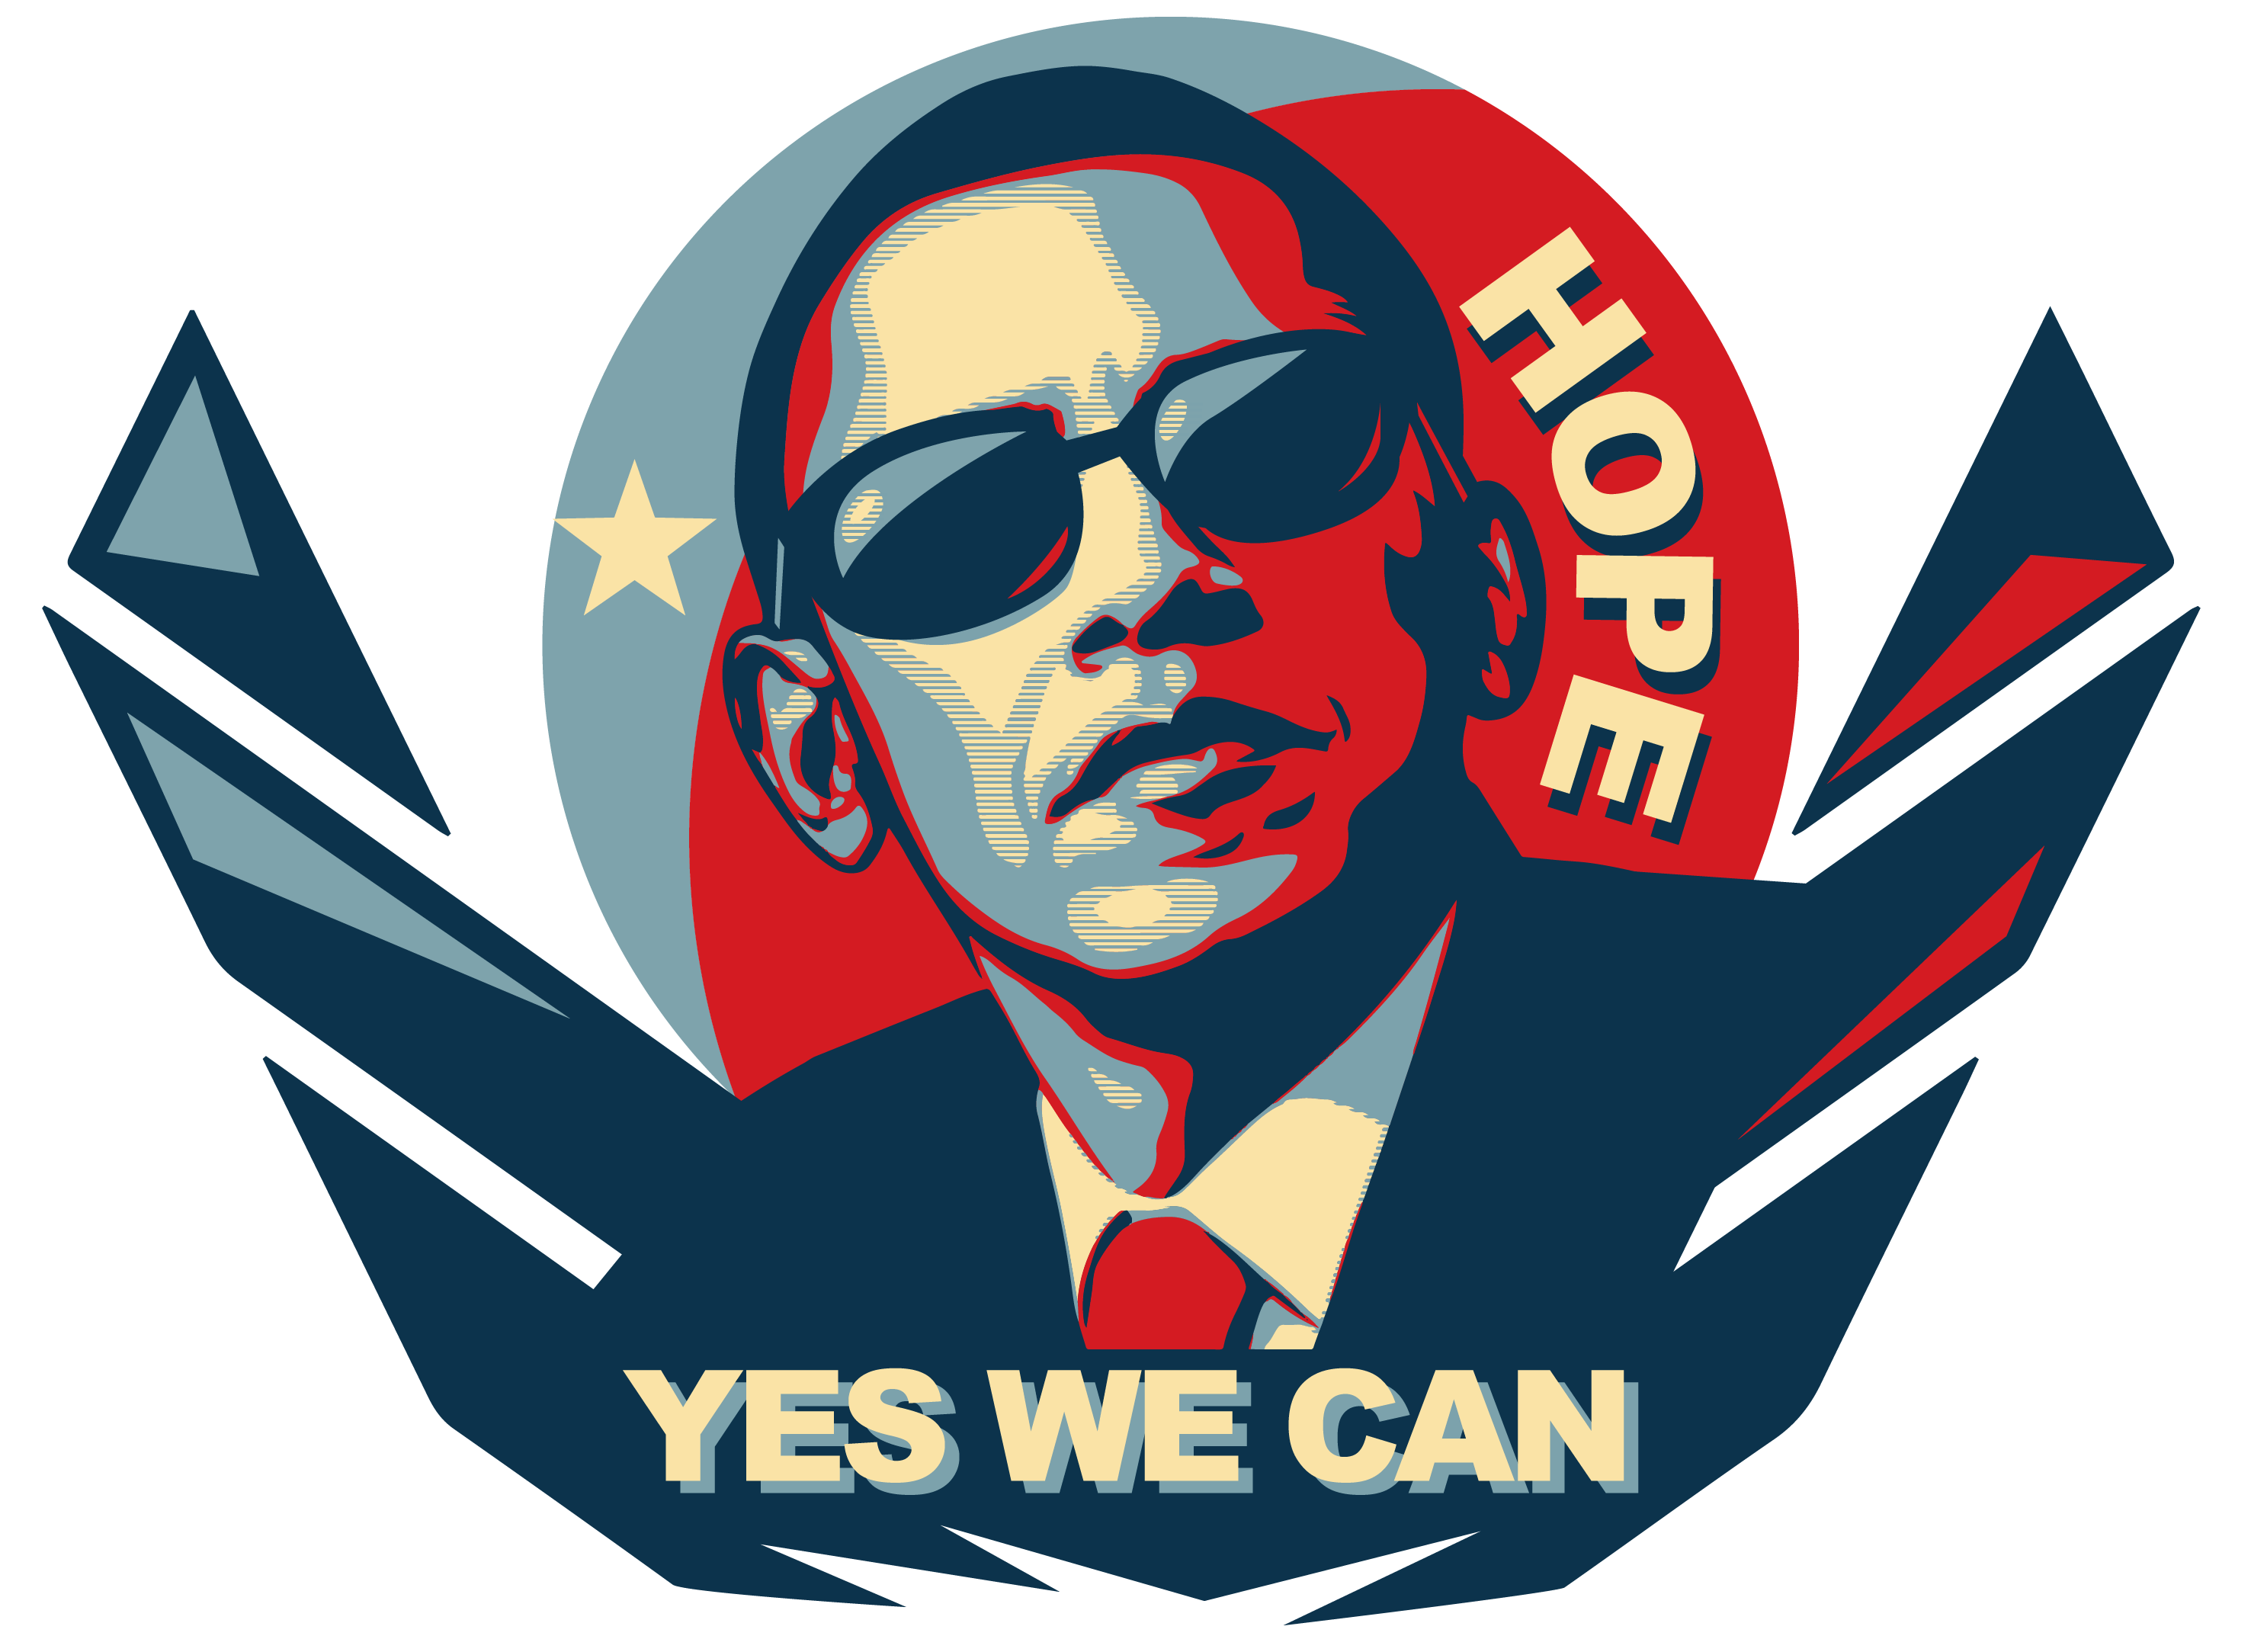 Obama with sunglasses Yes We Can